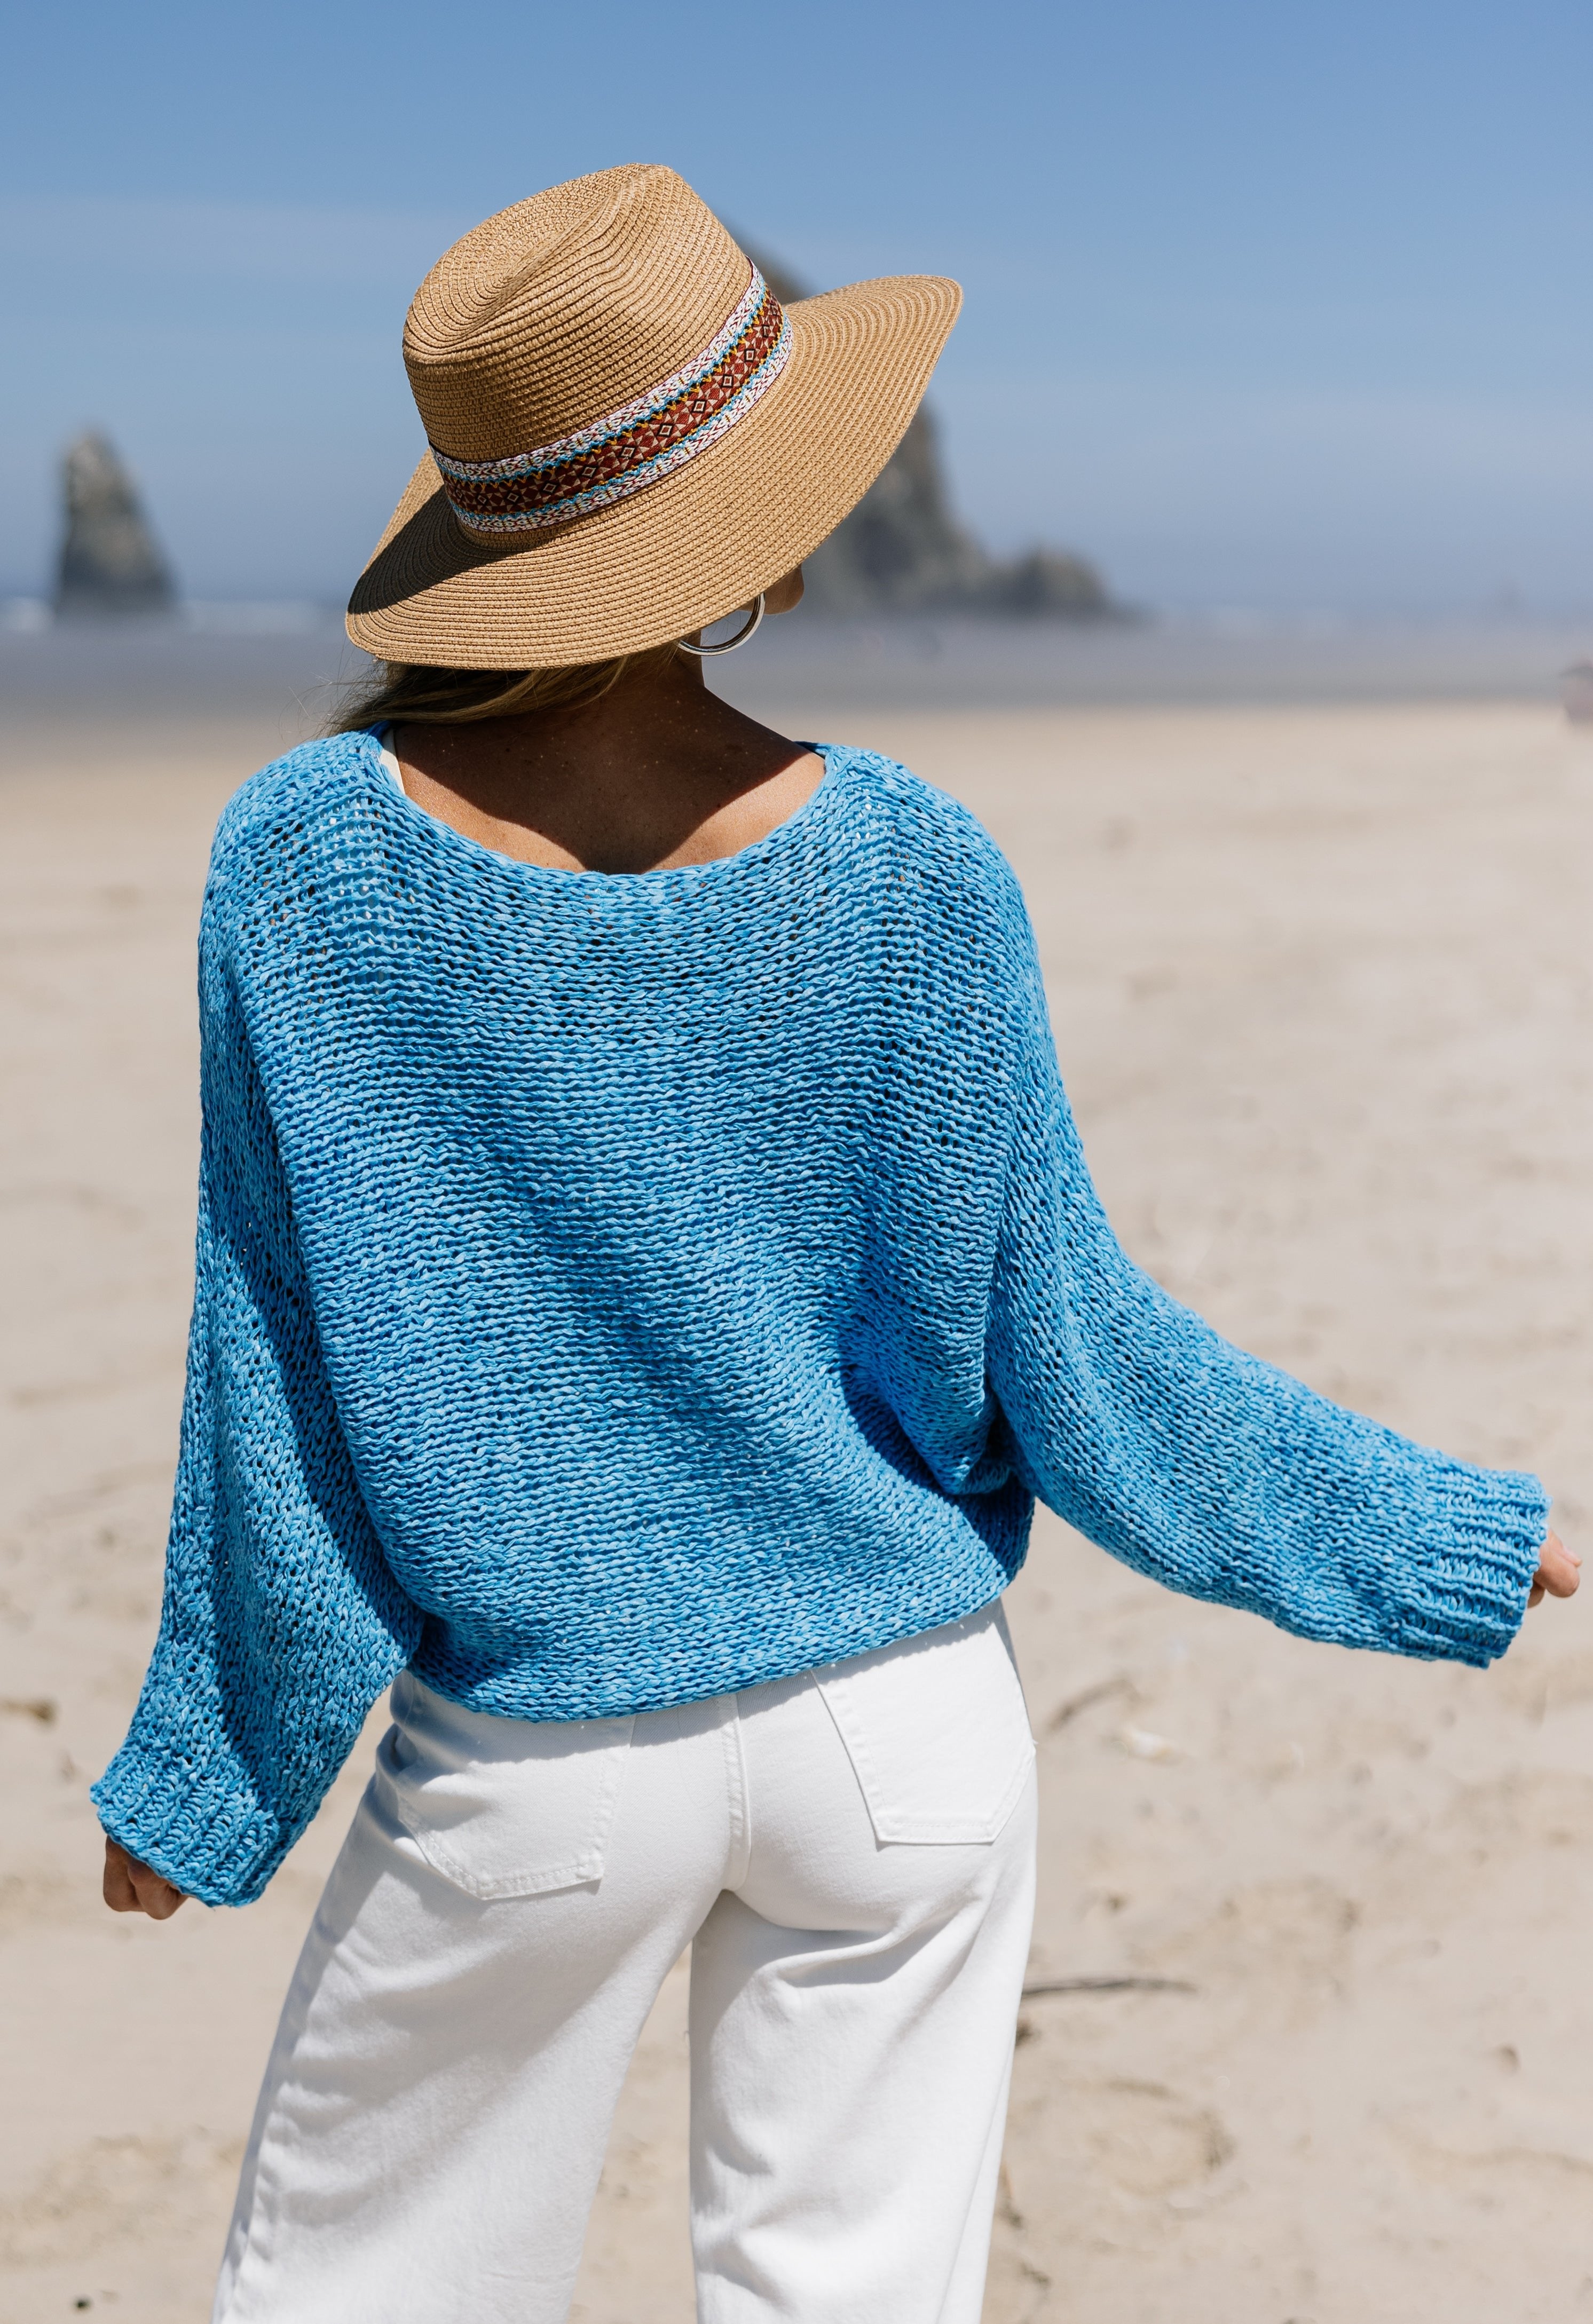 LB Sweater - MARINE BLUE - willows clothing SWEATER